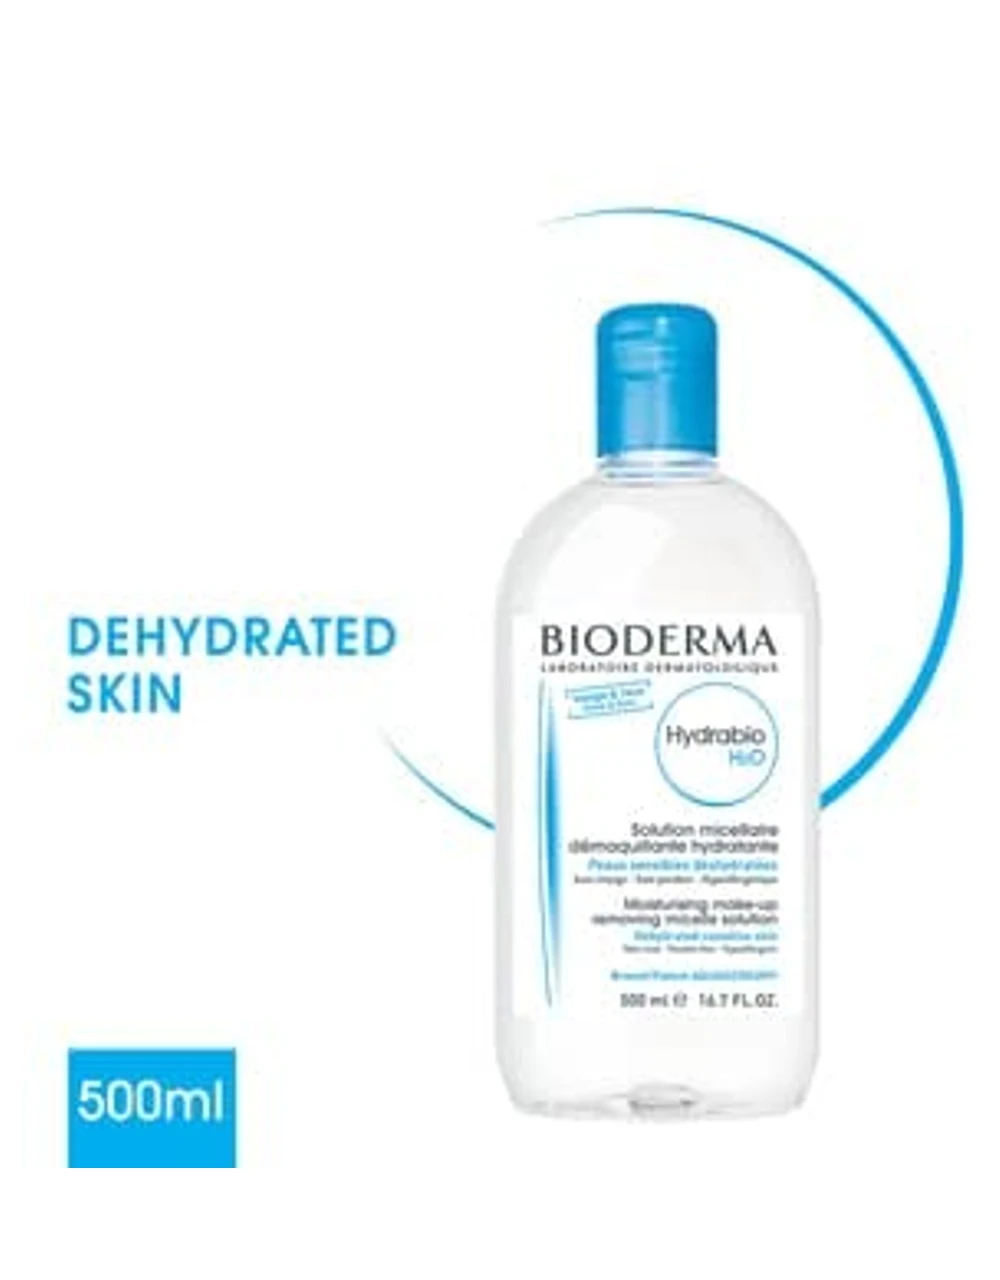 Bioderma Hydrabio H2O Micellar Water Face Cleanser and Makeup Remove